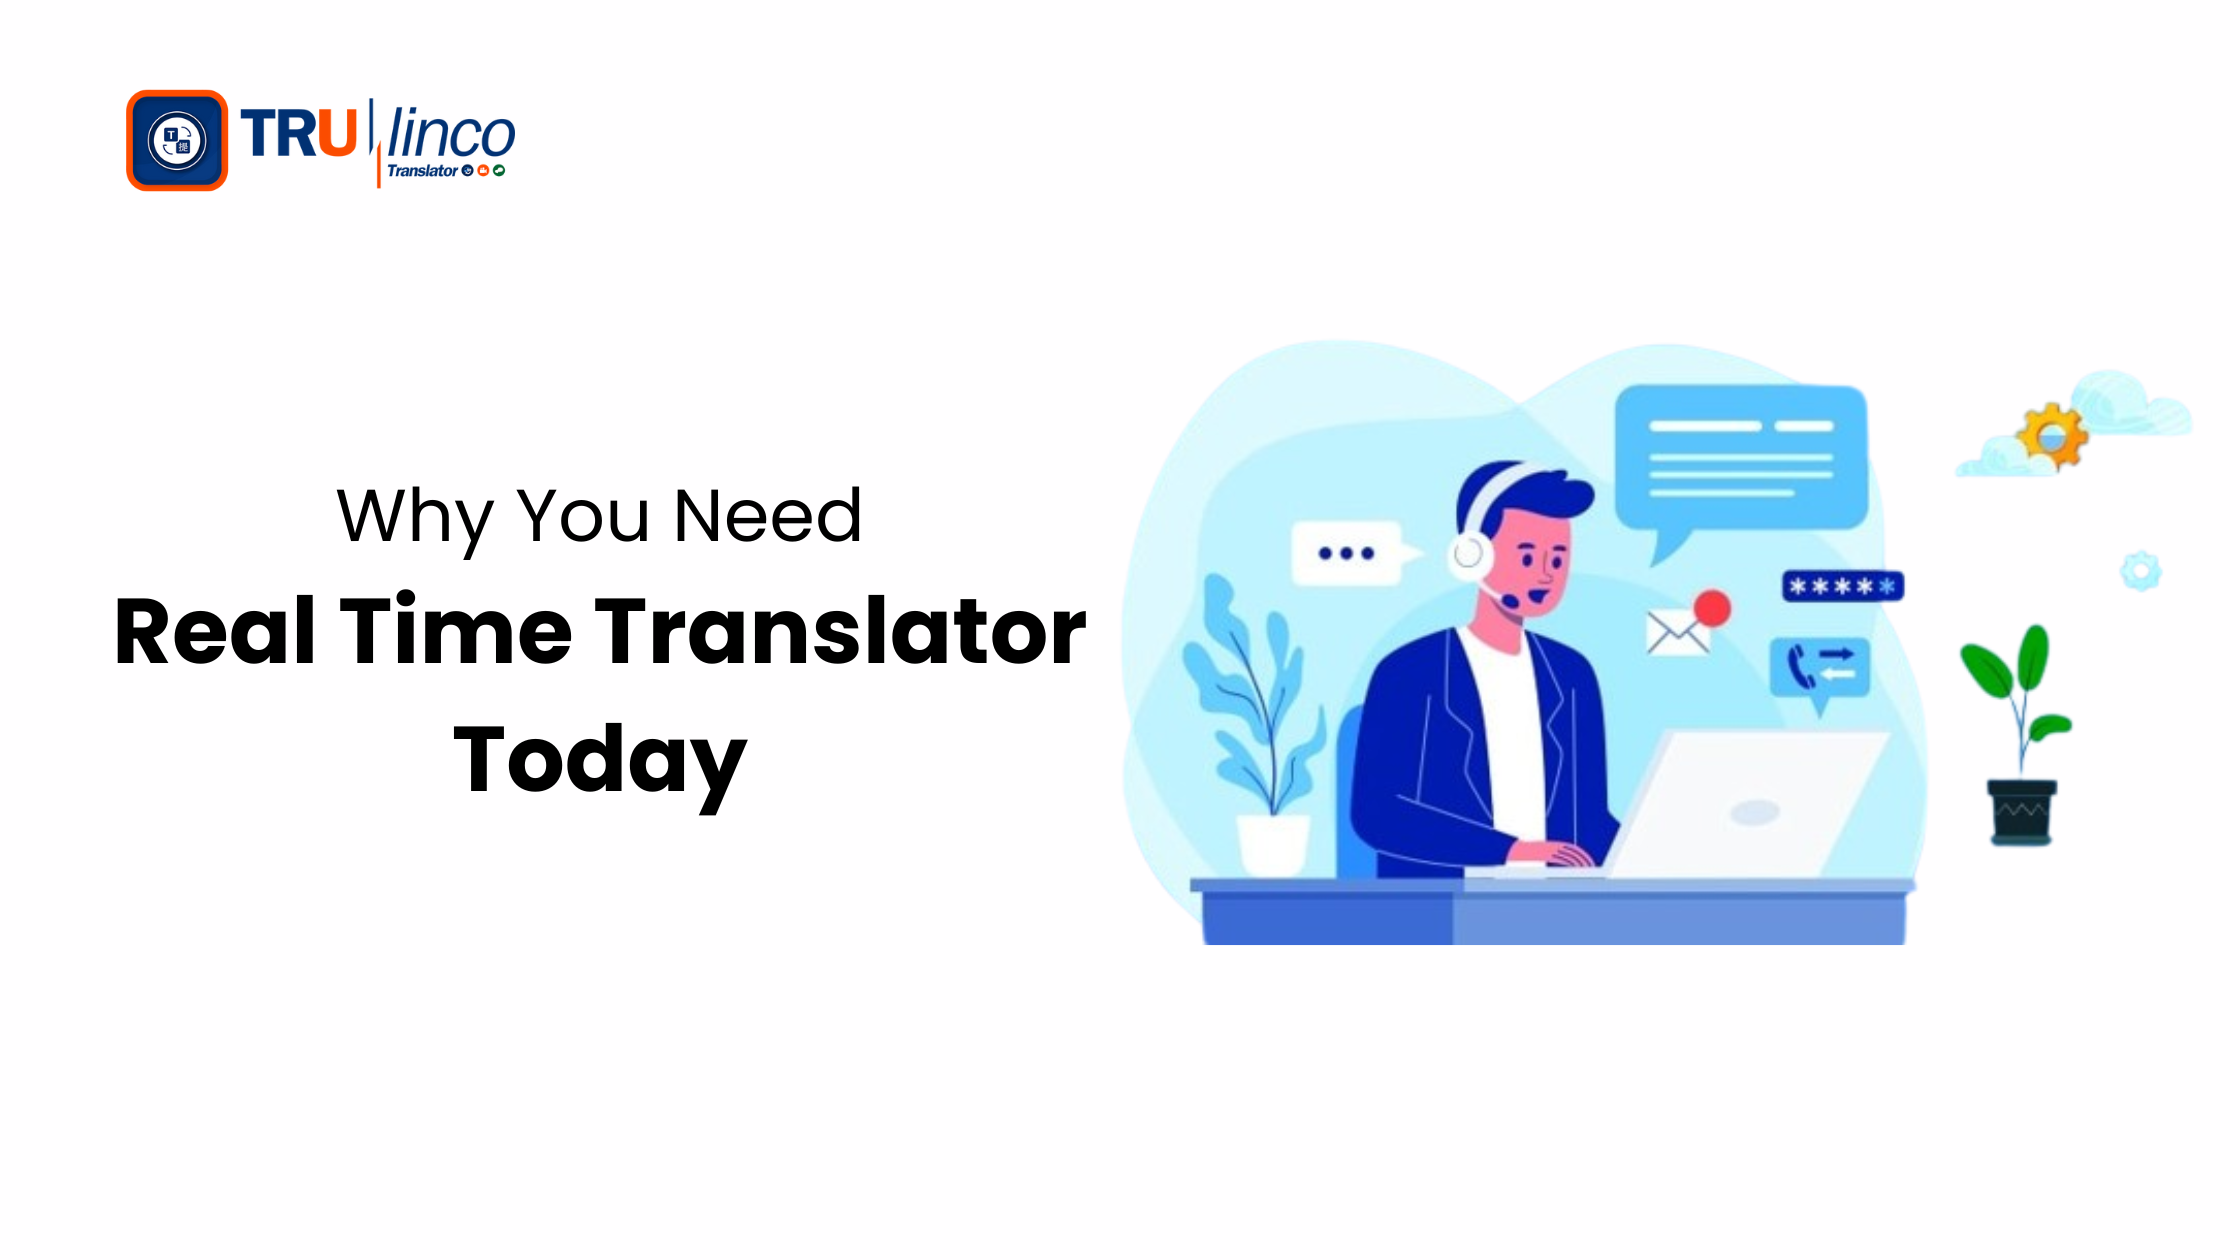 Why You Need a Real-Time Translator Today